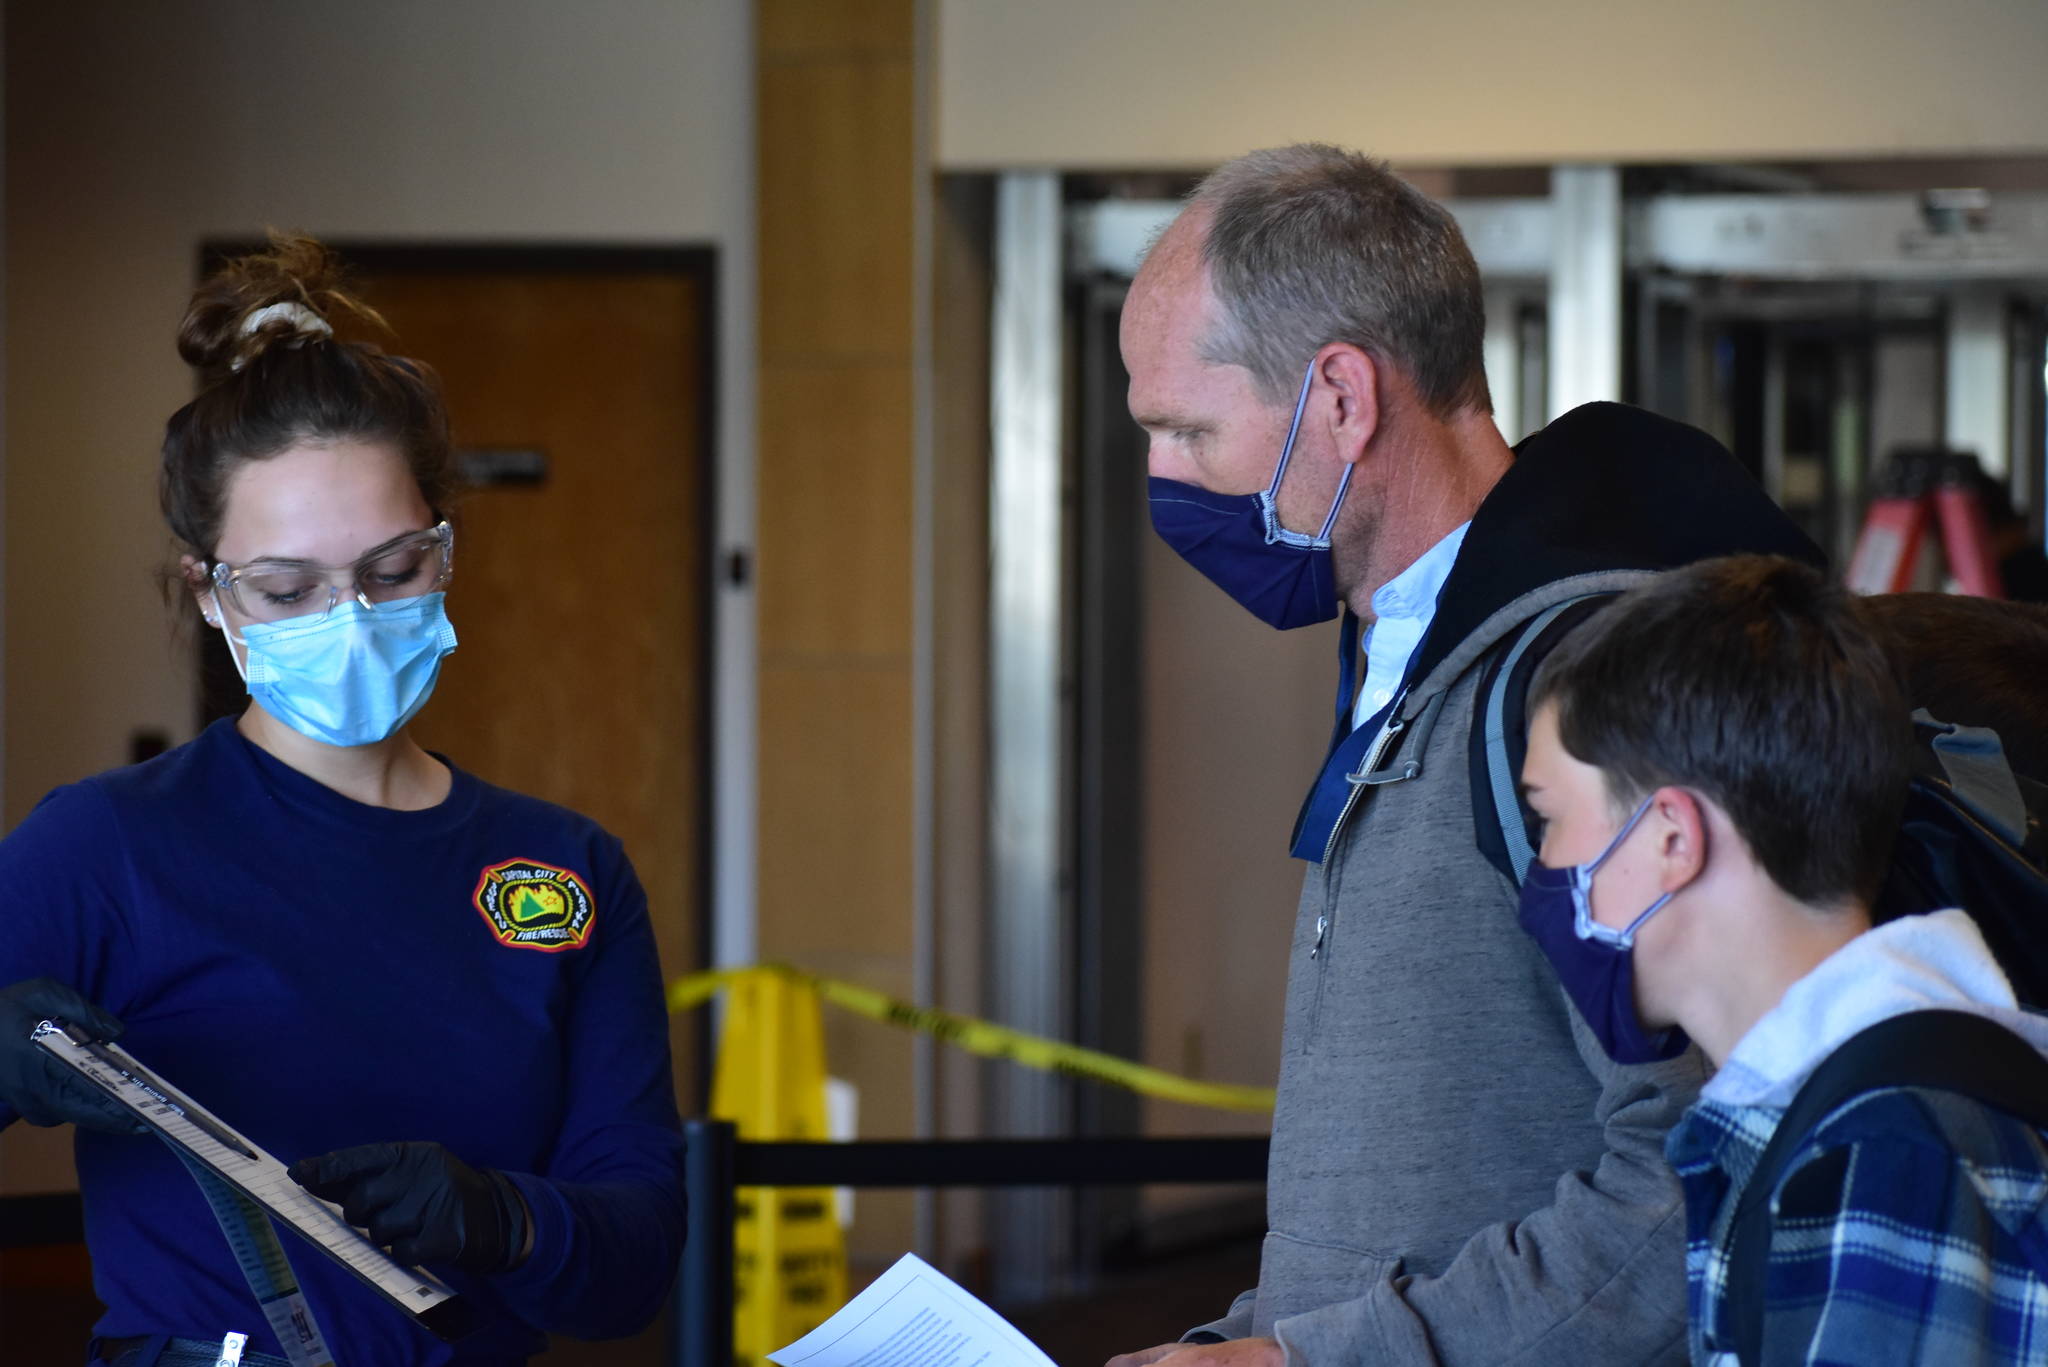 Peter Segall | Juneau Empire                                 A member of Capital City Fire/Rescue’s Airport Screening Task Force explains a questionnaire form to a family disembarking from a flight arriving at the Juneau International Airport on Wednesday, May 27, 2020.